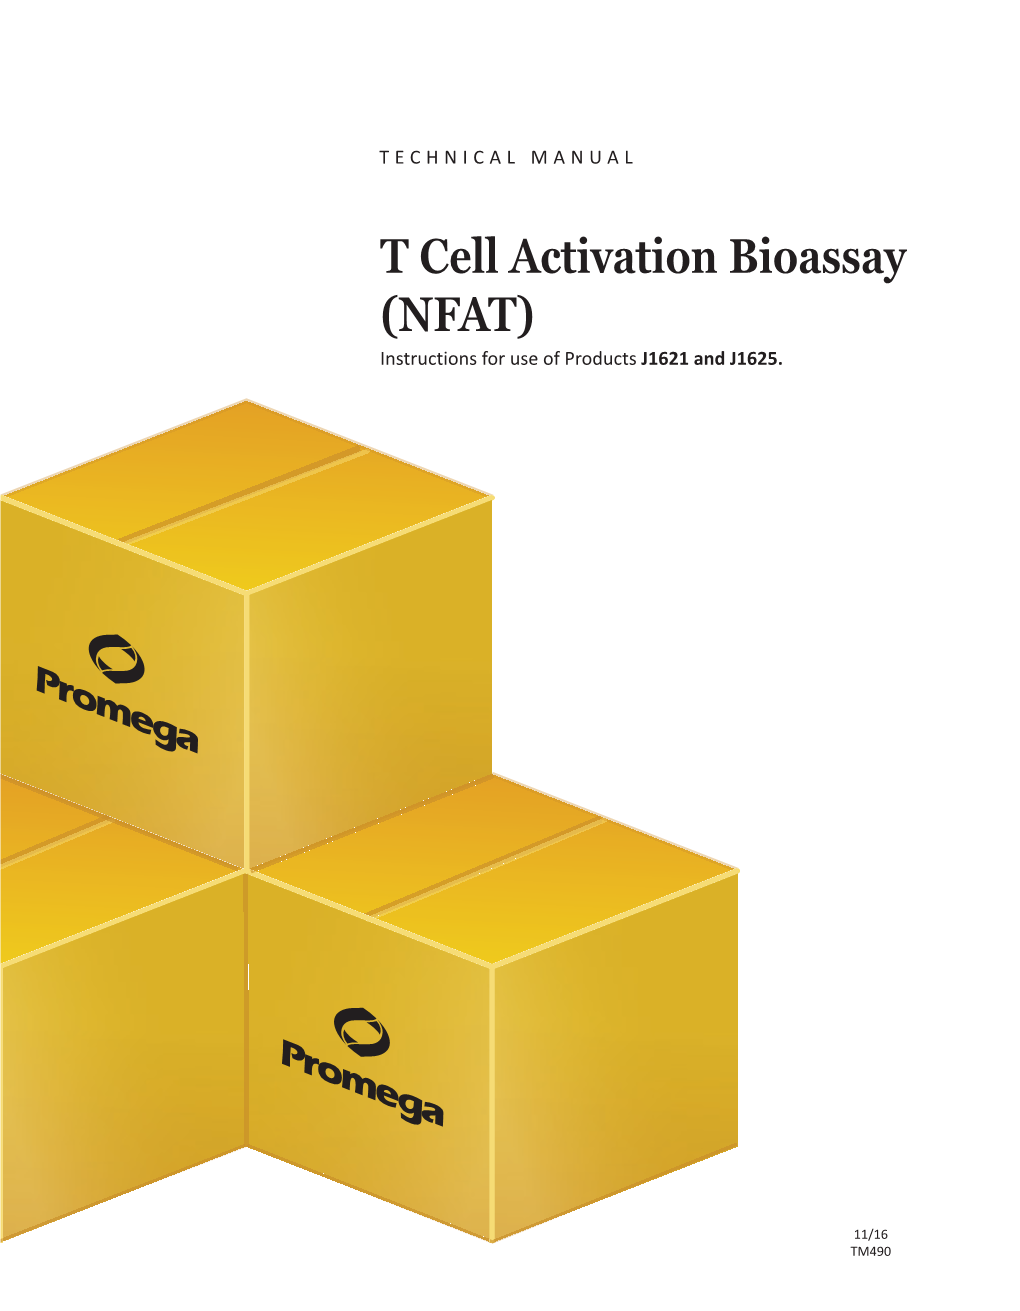 T Cell Activation Bioassay (NFAT) Instructions for Use of Products J1621 and J1625